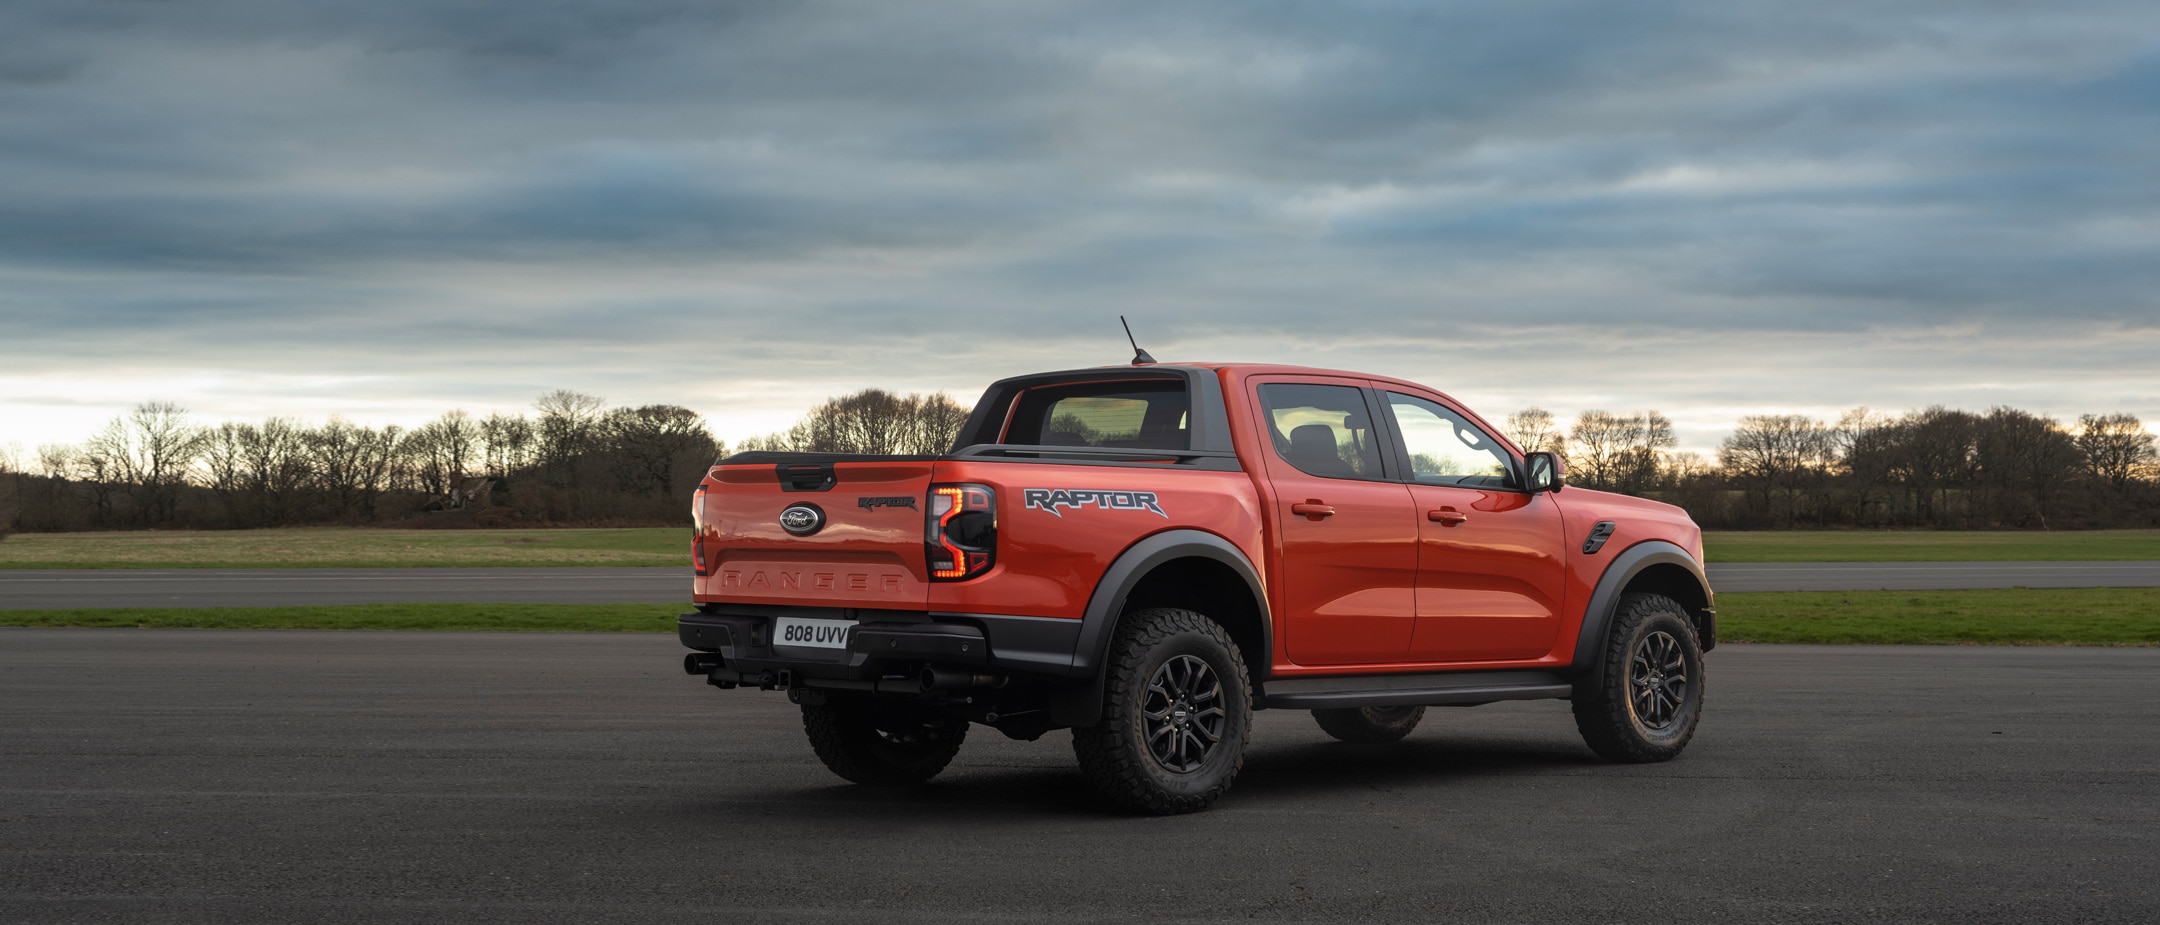 All-New Ford Ranger Raptor rear 3/4 view